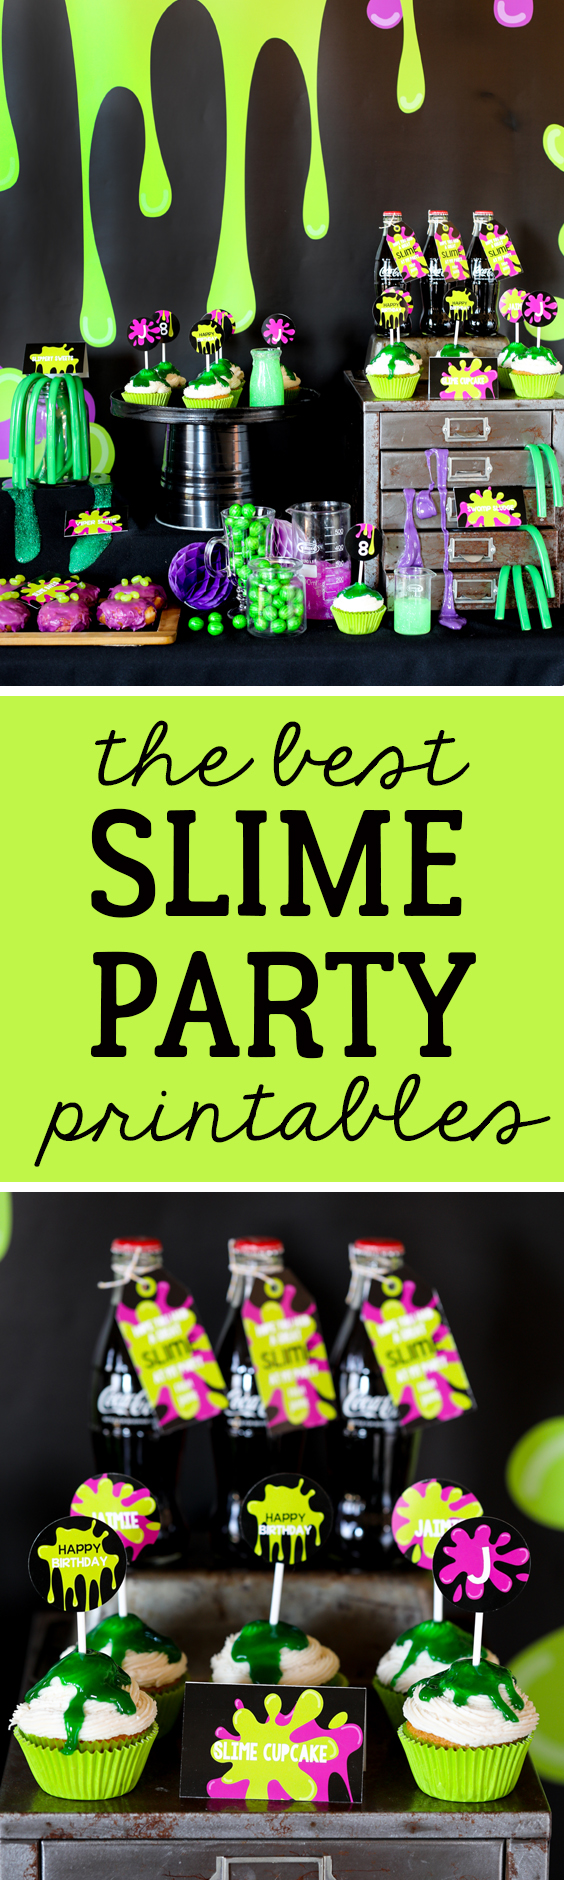 Slime Party Printables